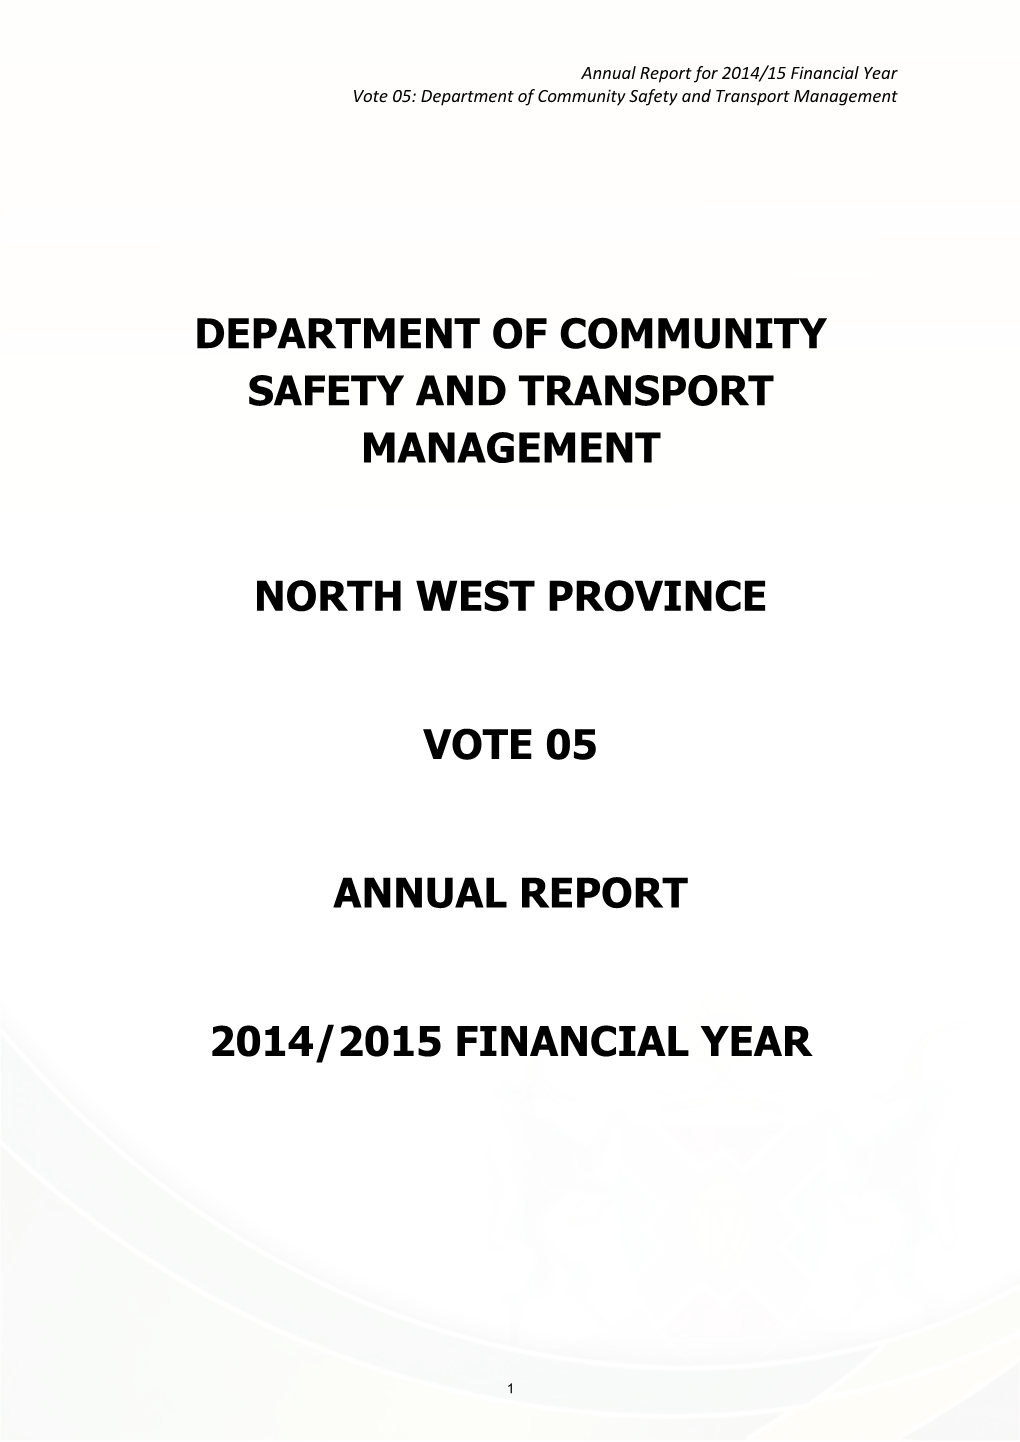 Department of Community Safety and Transport Management